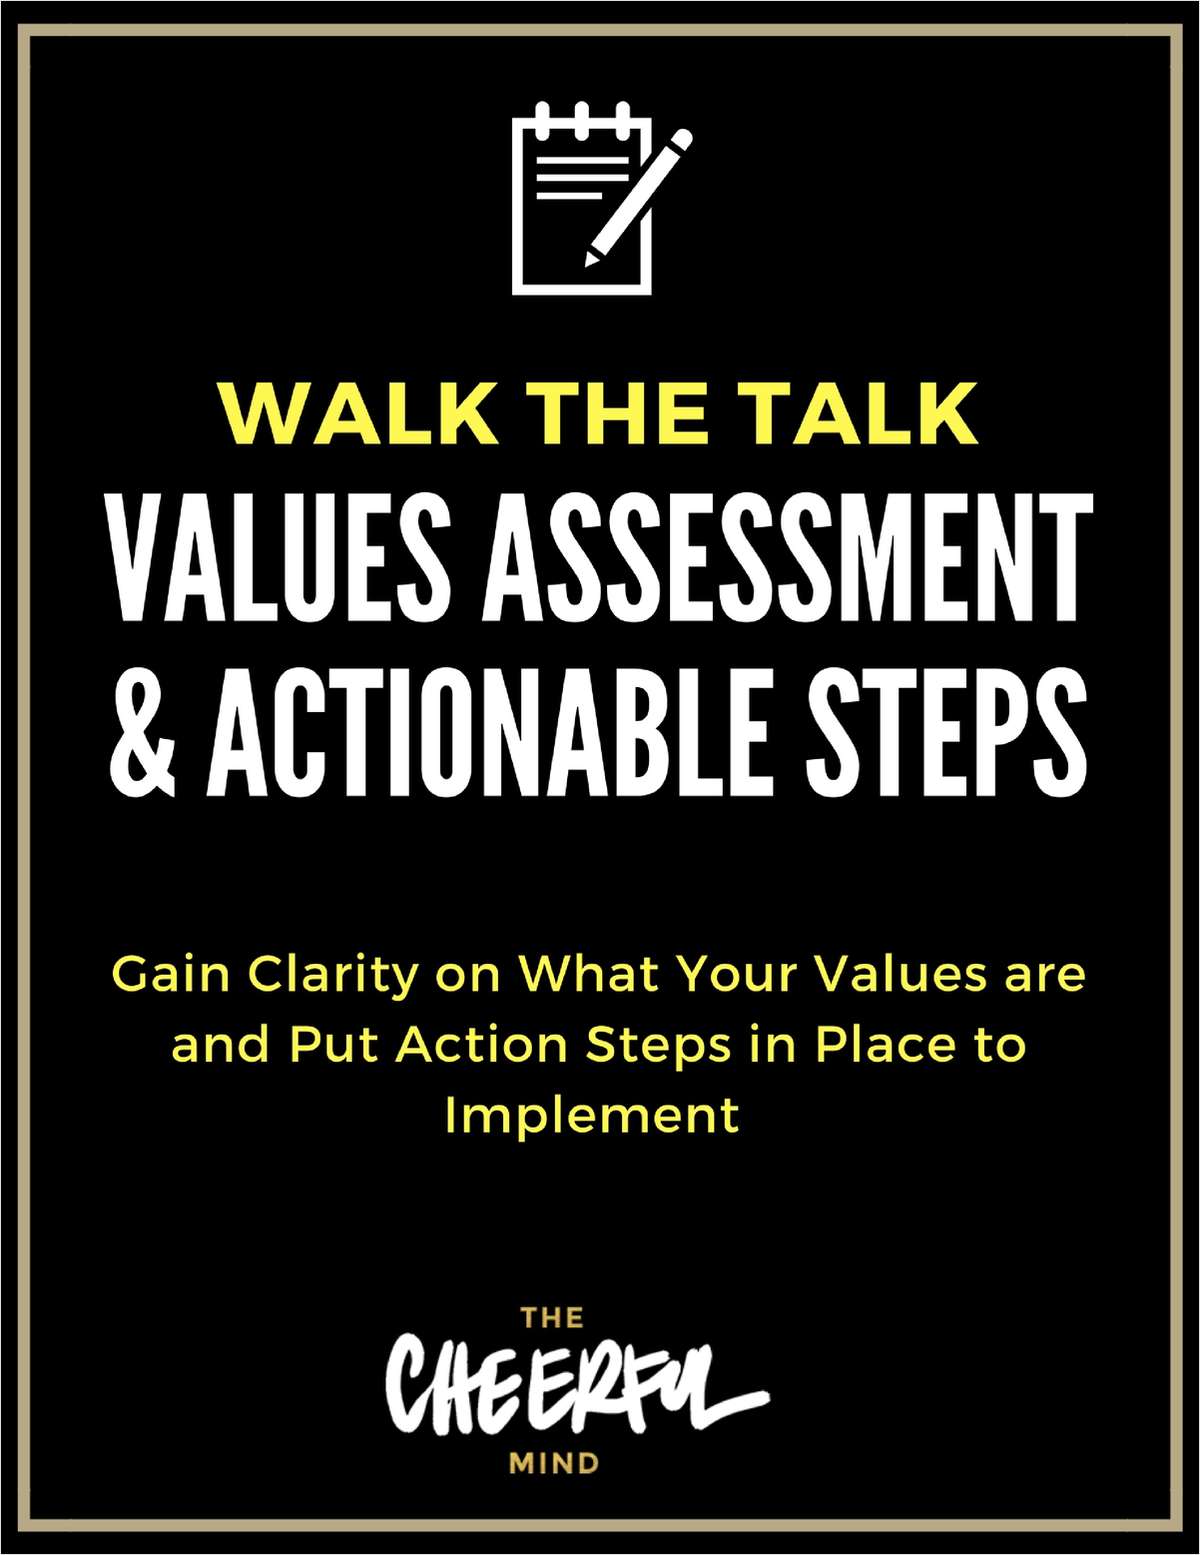 Walk the Talk: Values Assessment & Actionable Steps